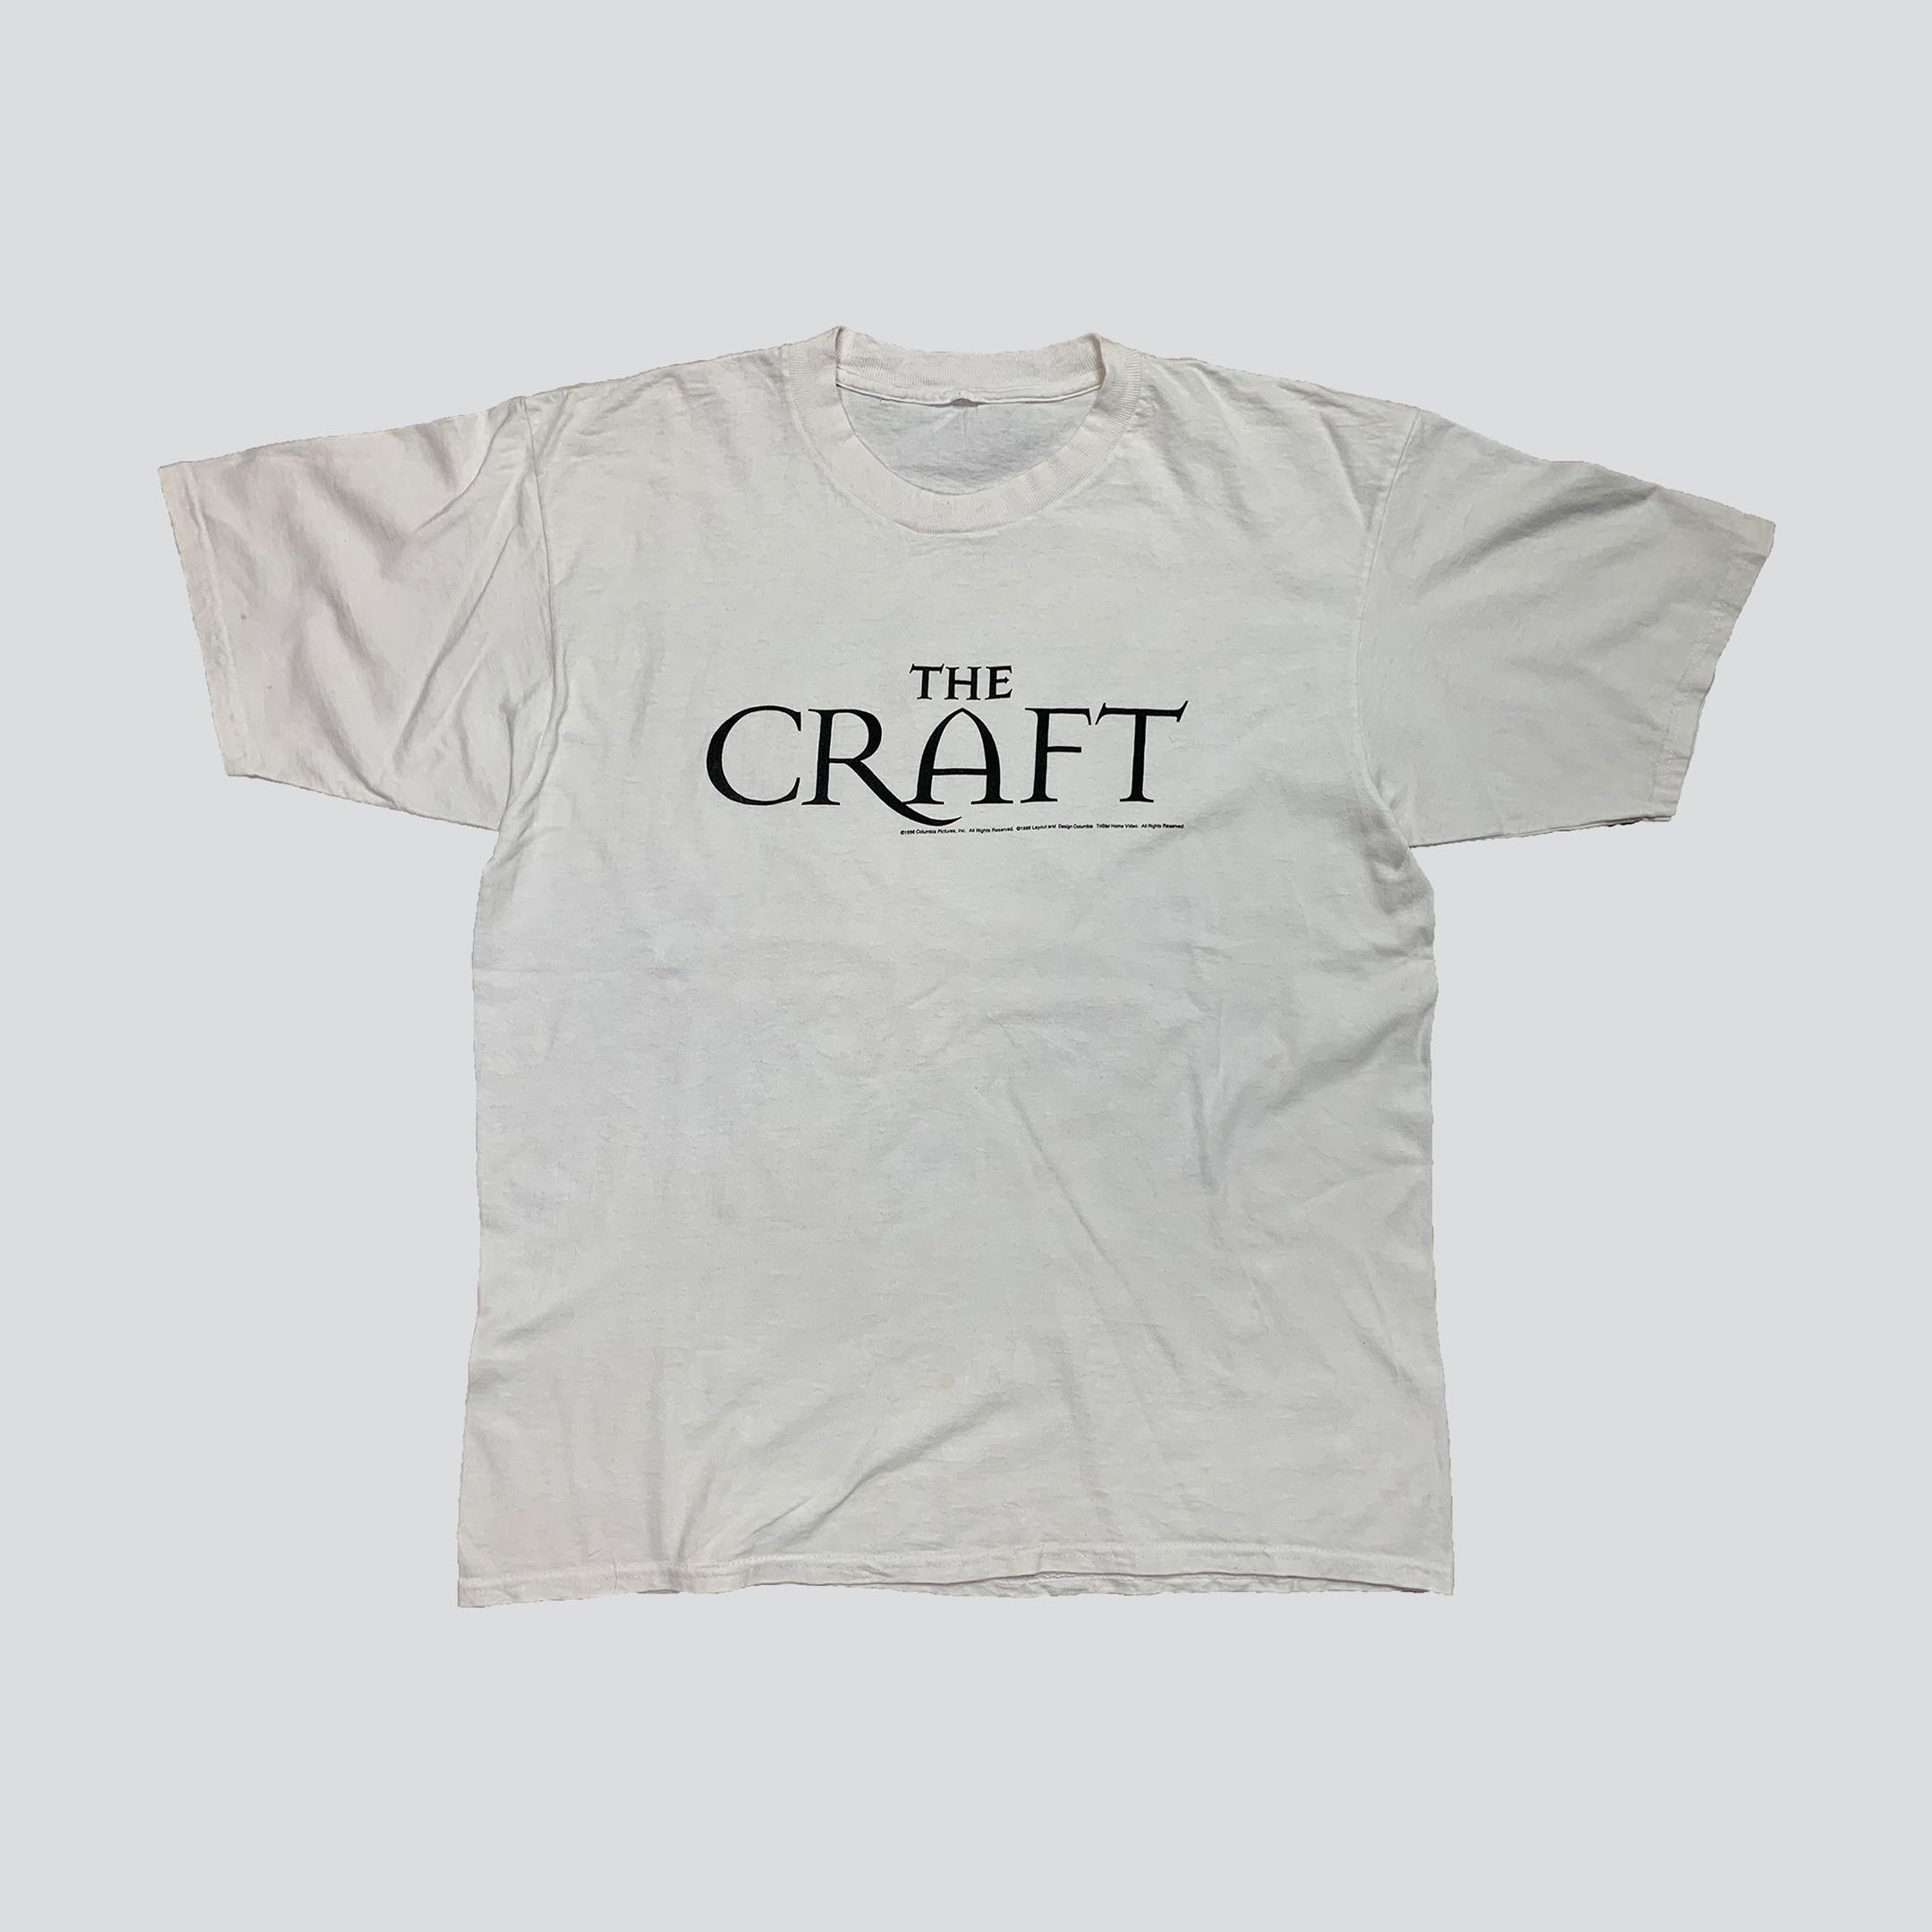 The Craft T Shirt The Craft 1996 Shirt Movie Tee 90s Tee Y2K Shirt Size L Xl - 1